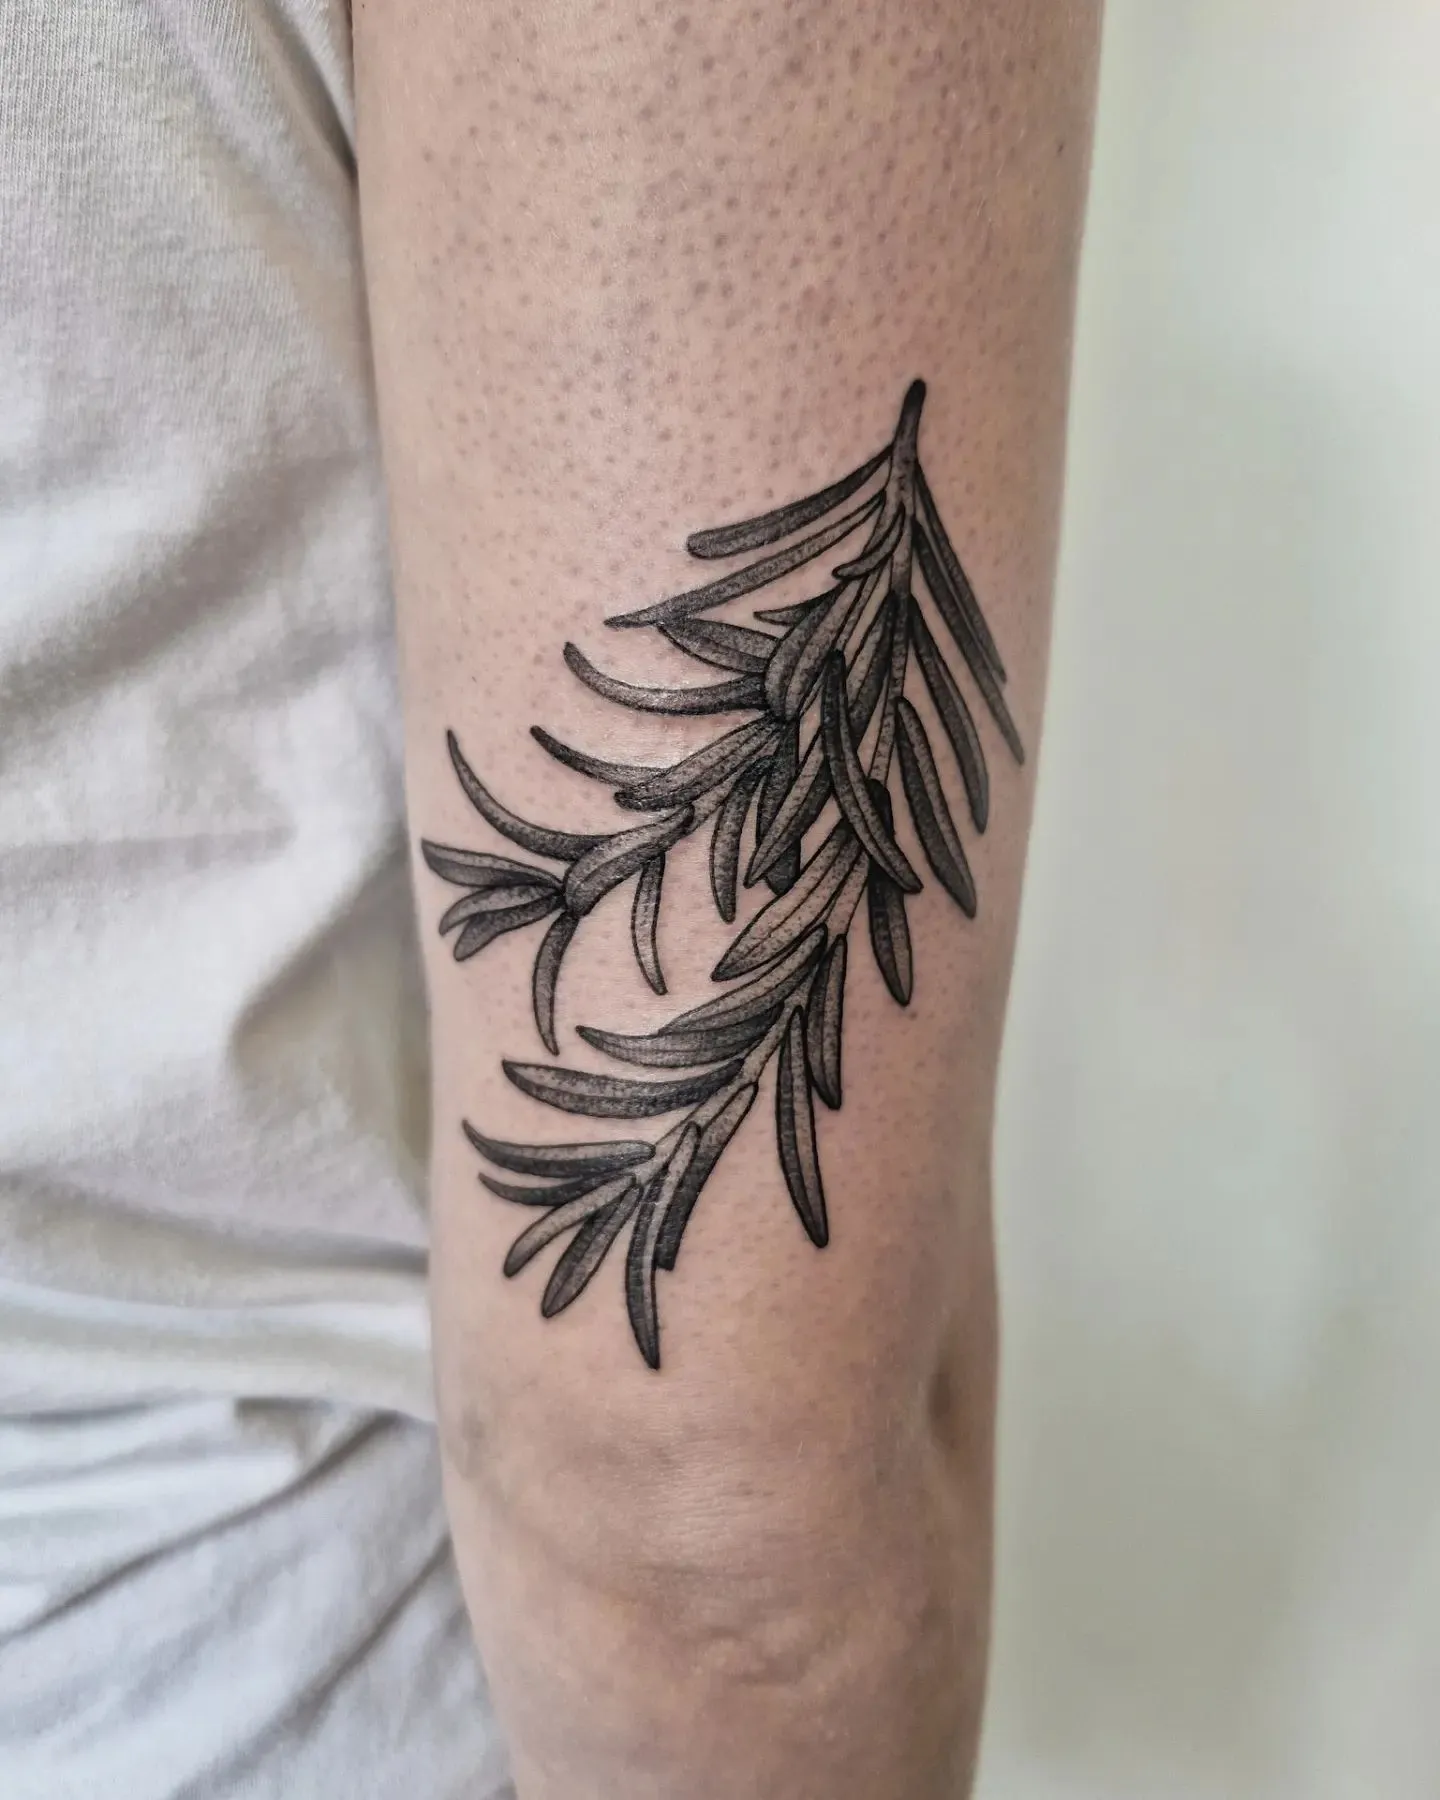 Inked Elegance of Rosemary on the Forearm